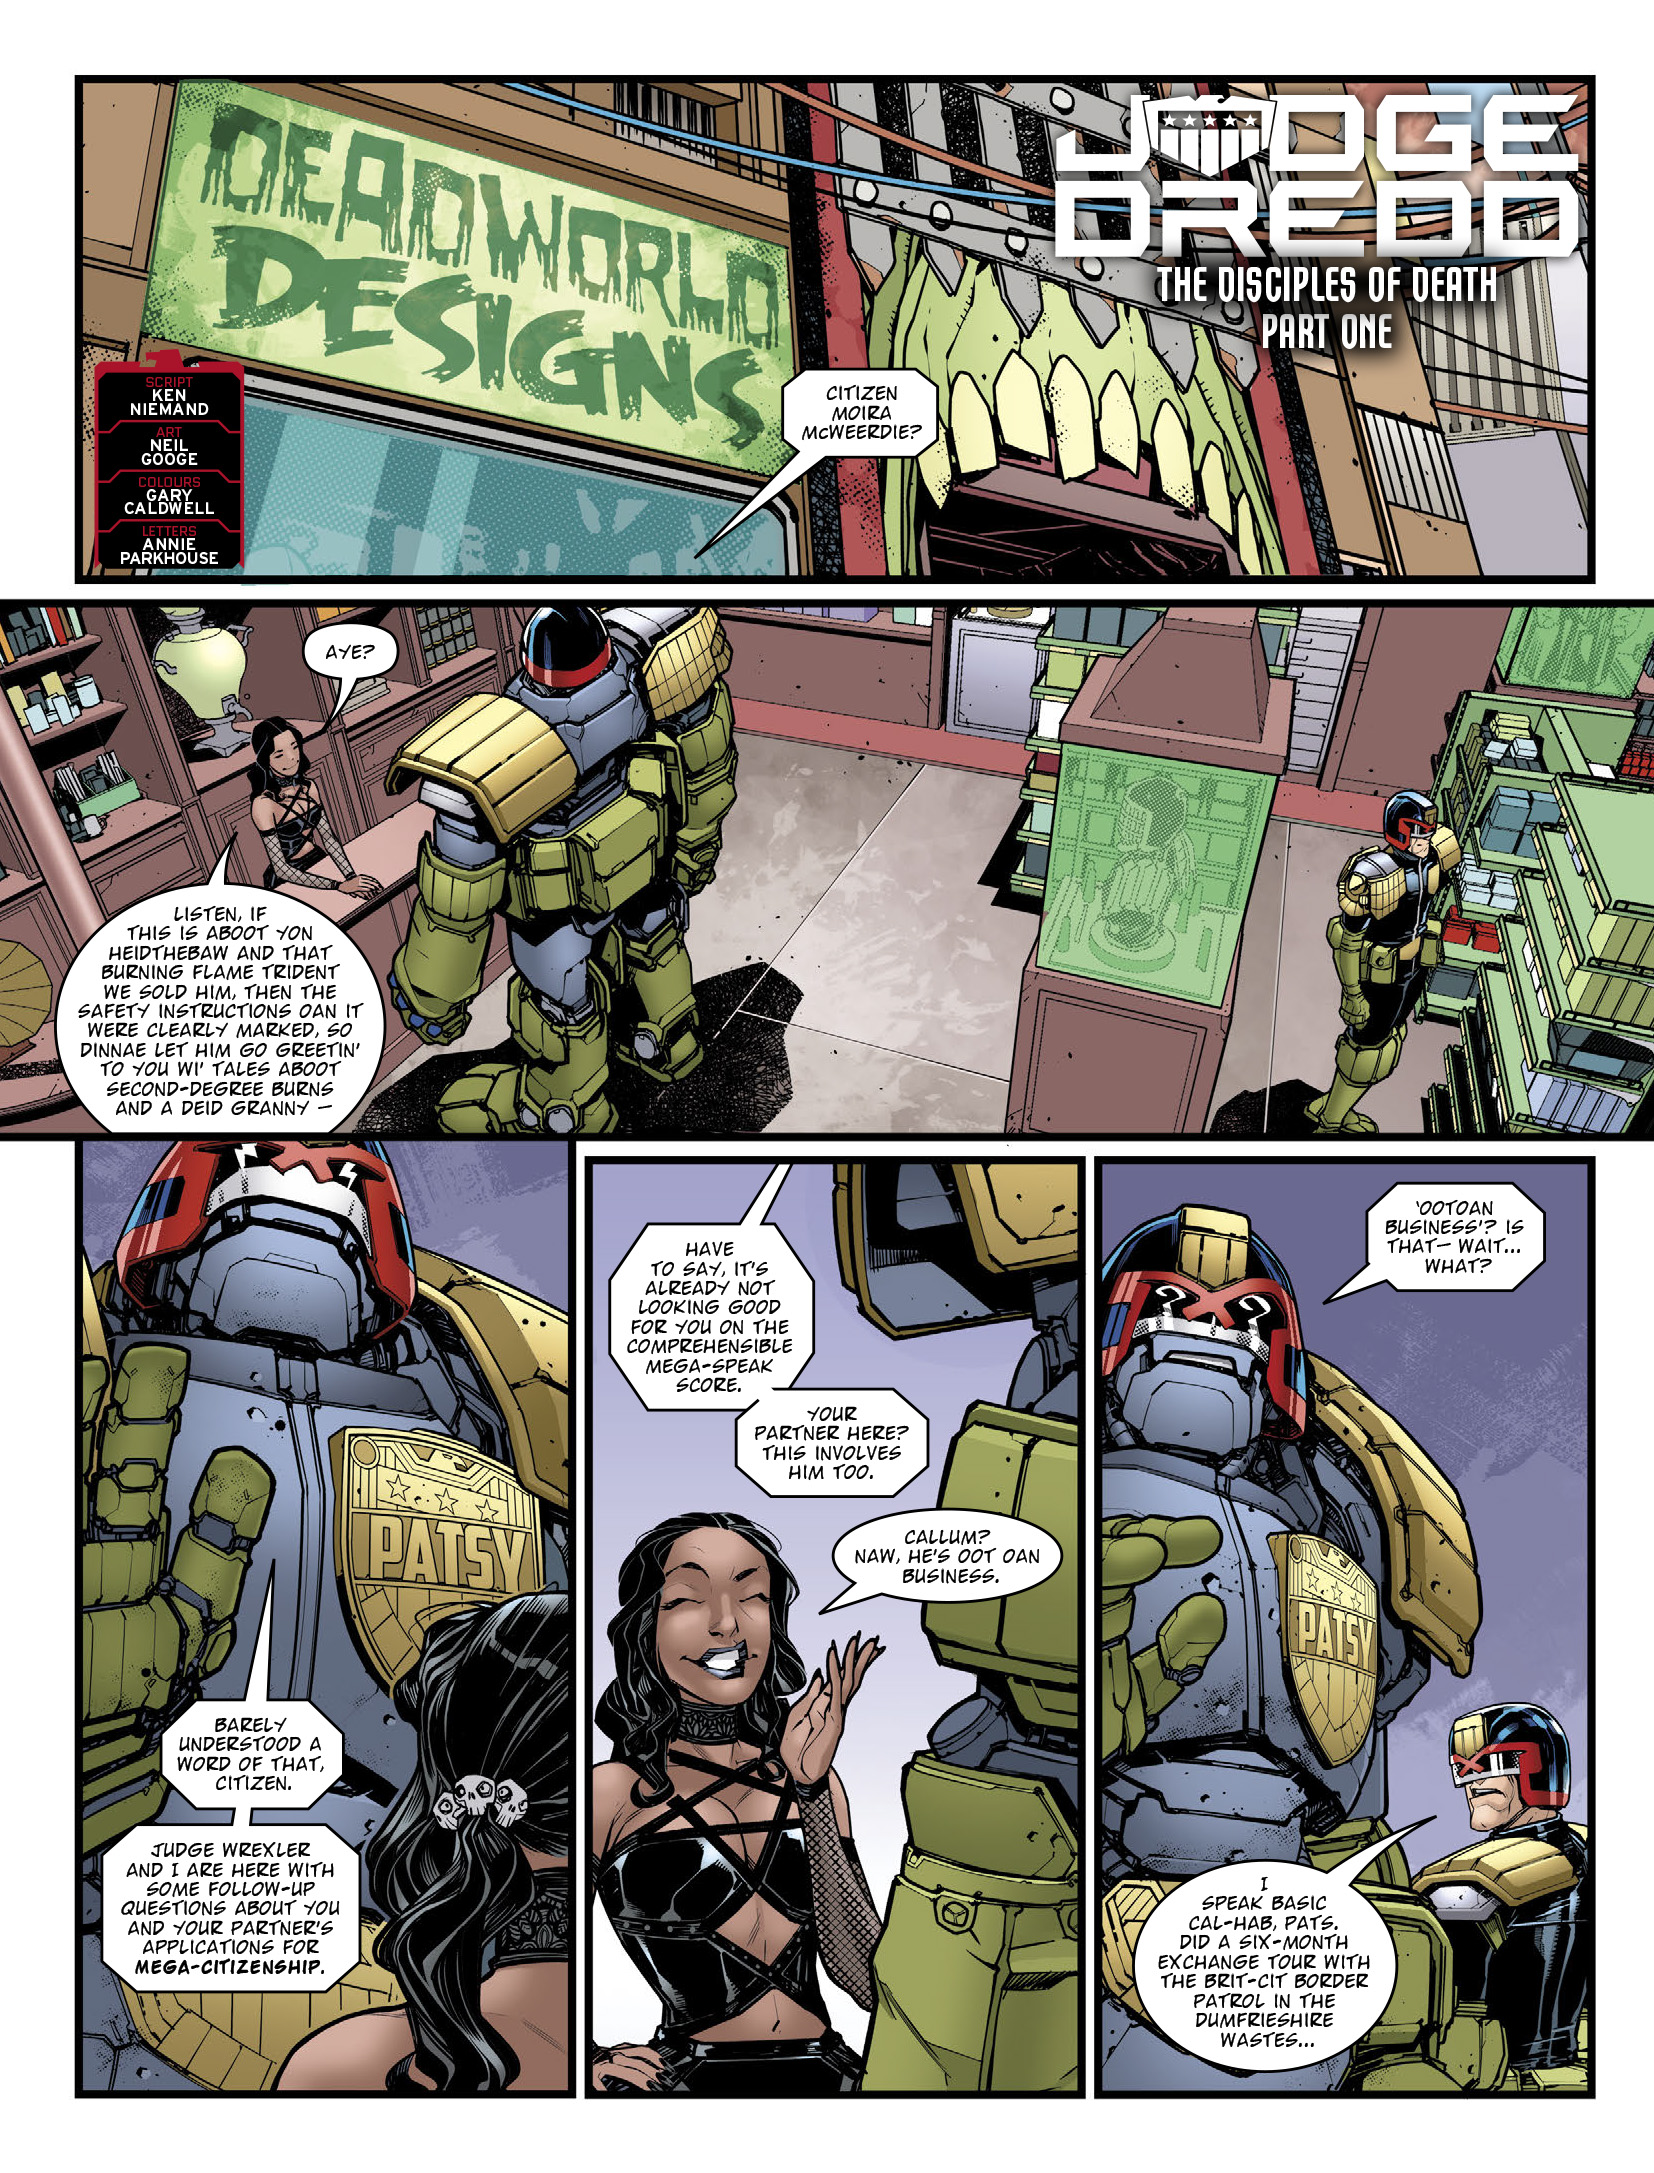 2000 AD: Chapter 2328 - Page 3